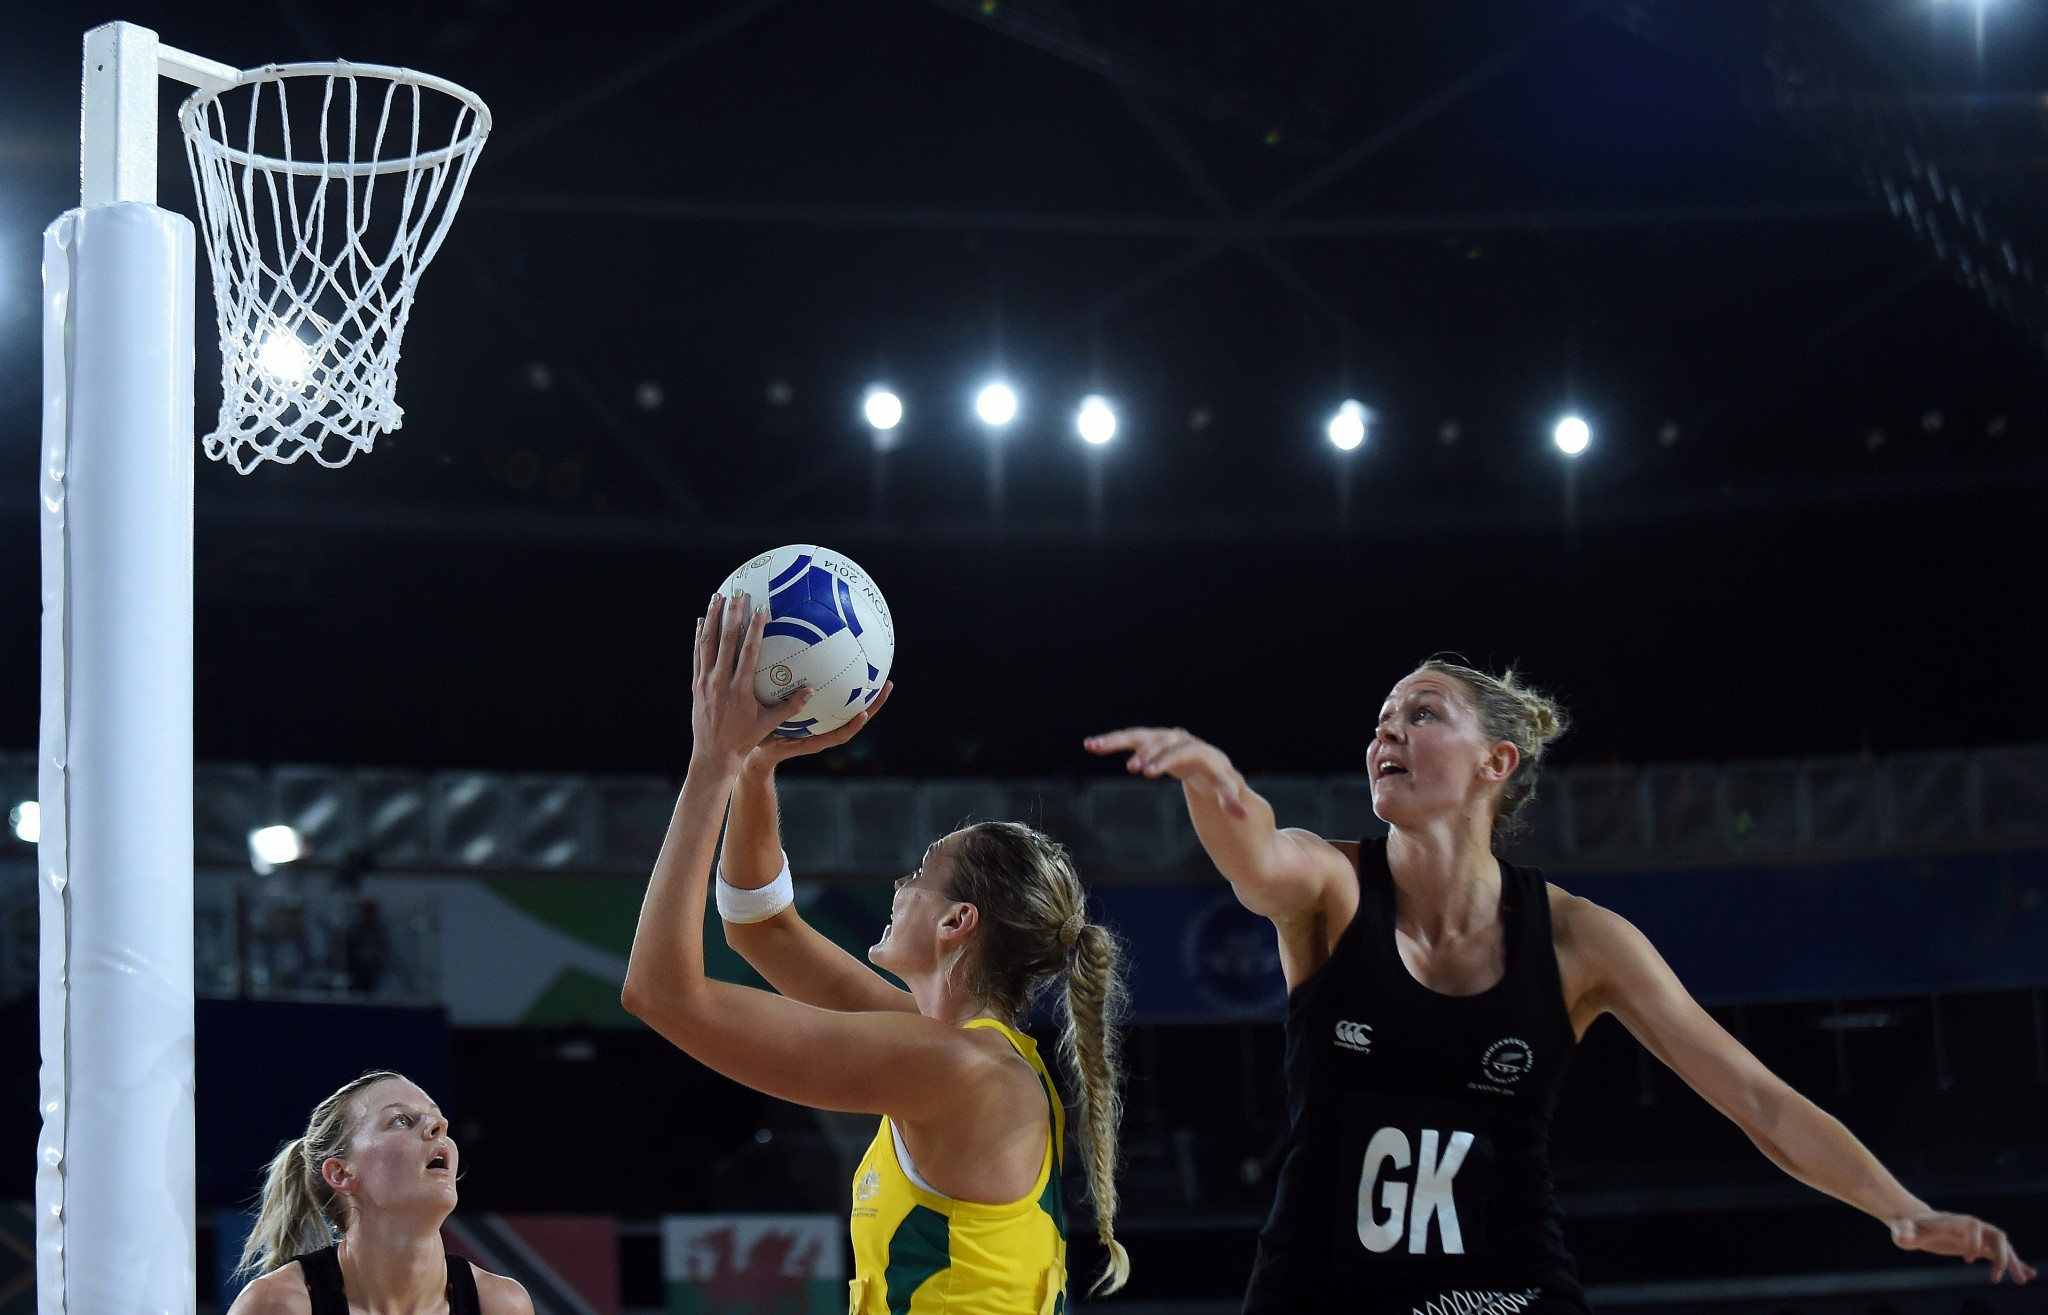 Draw procedure and schedule for Gold Coast 2018 netball tournament unveiled